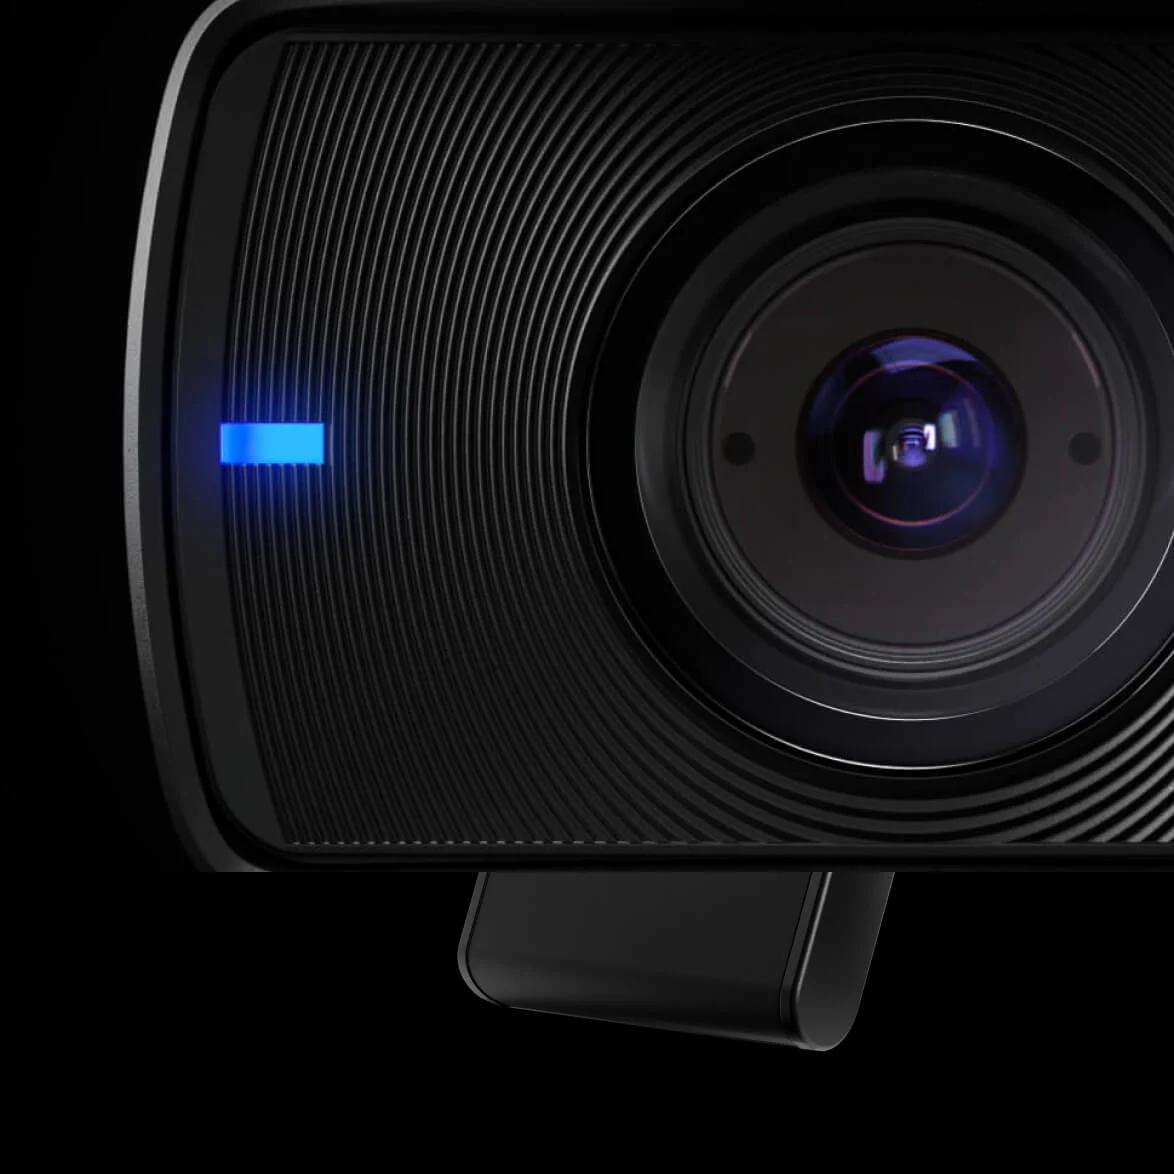 A closeup frontal view of Facecam